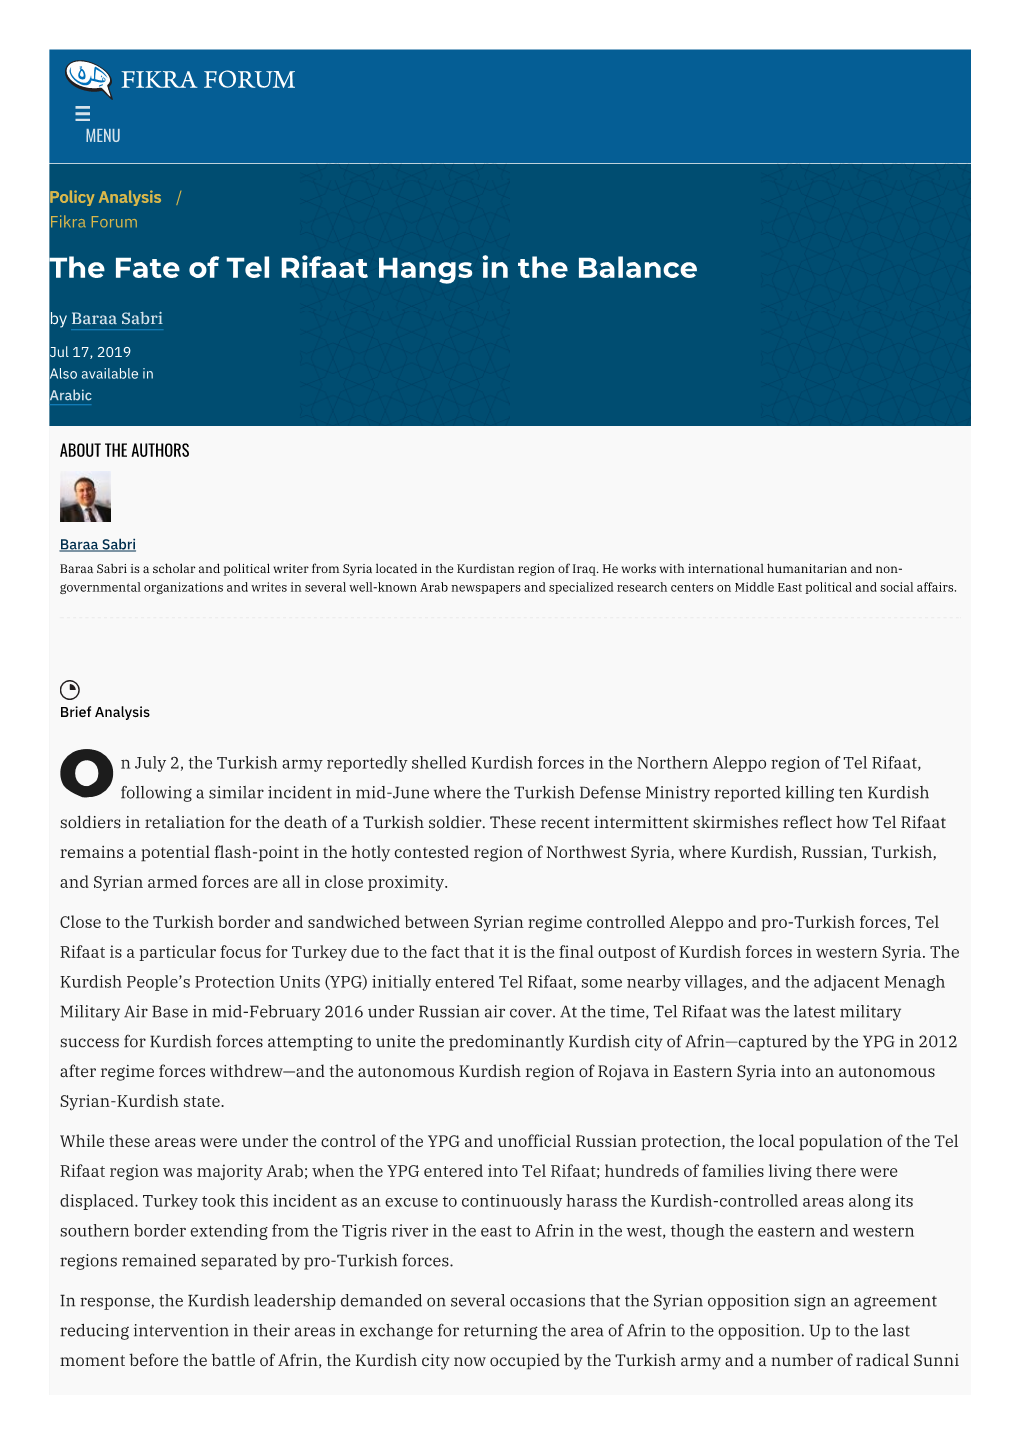 The Fate of Tel Rifaat Hangs in the Balance | the Washington Institute